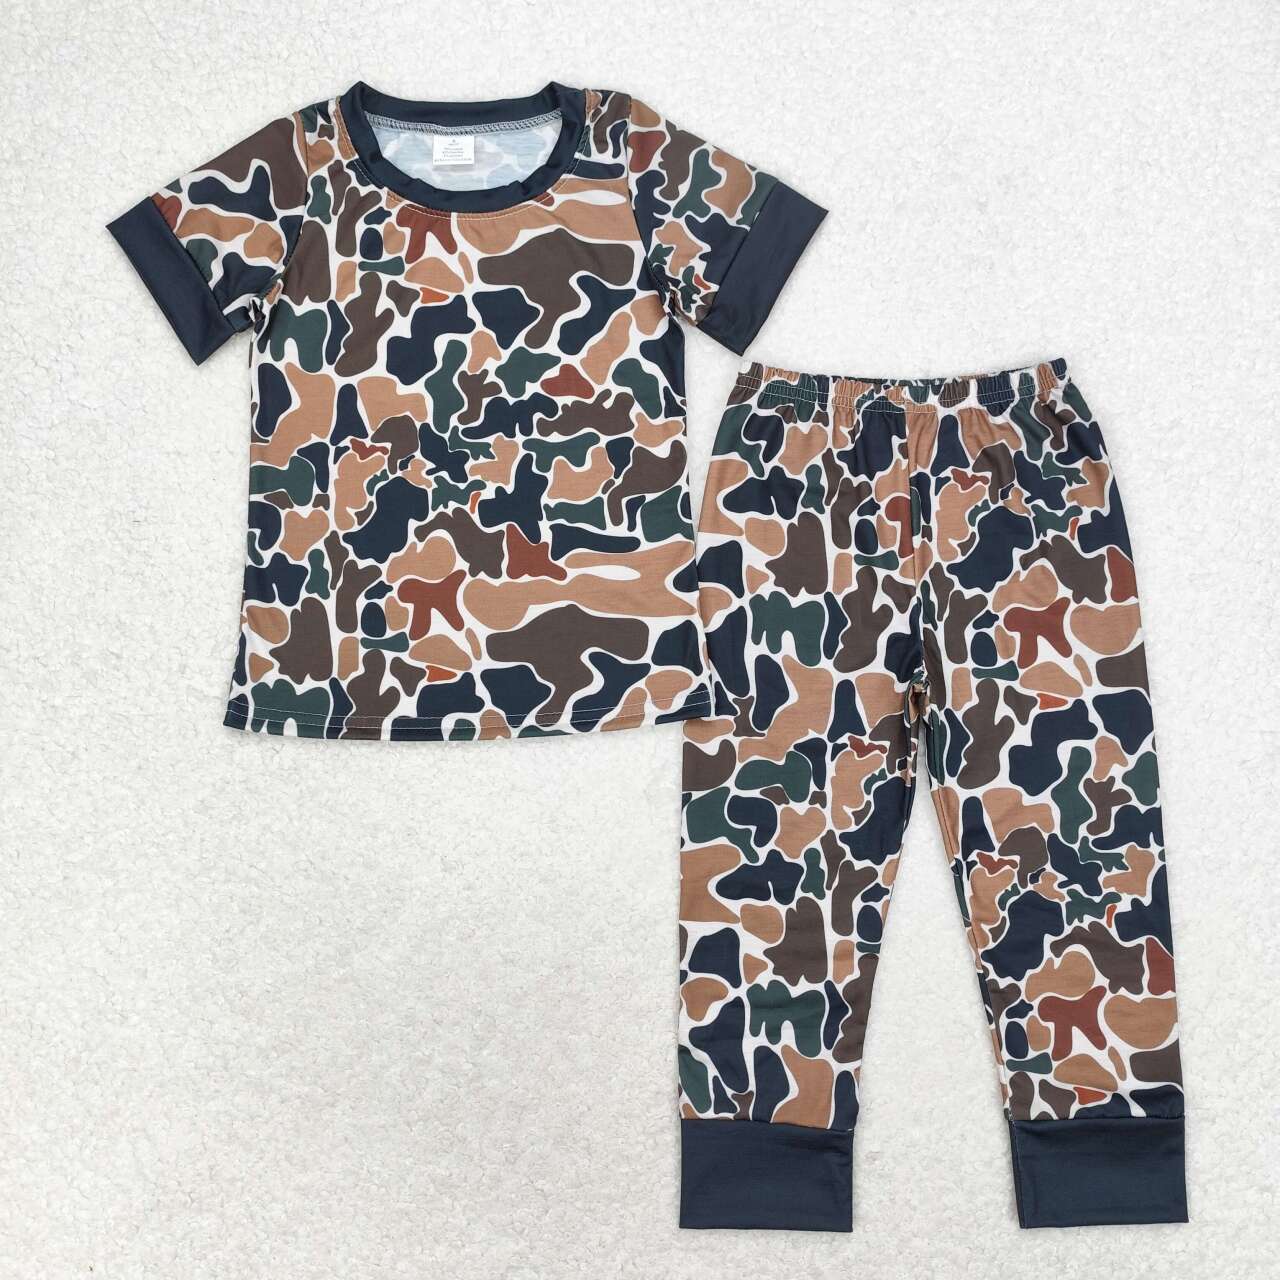 BSPO0443 Green camouflage beige short-sleeved trousers pajama set